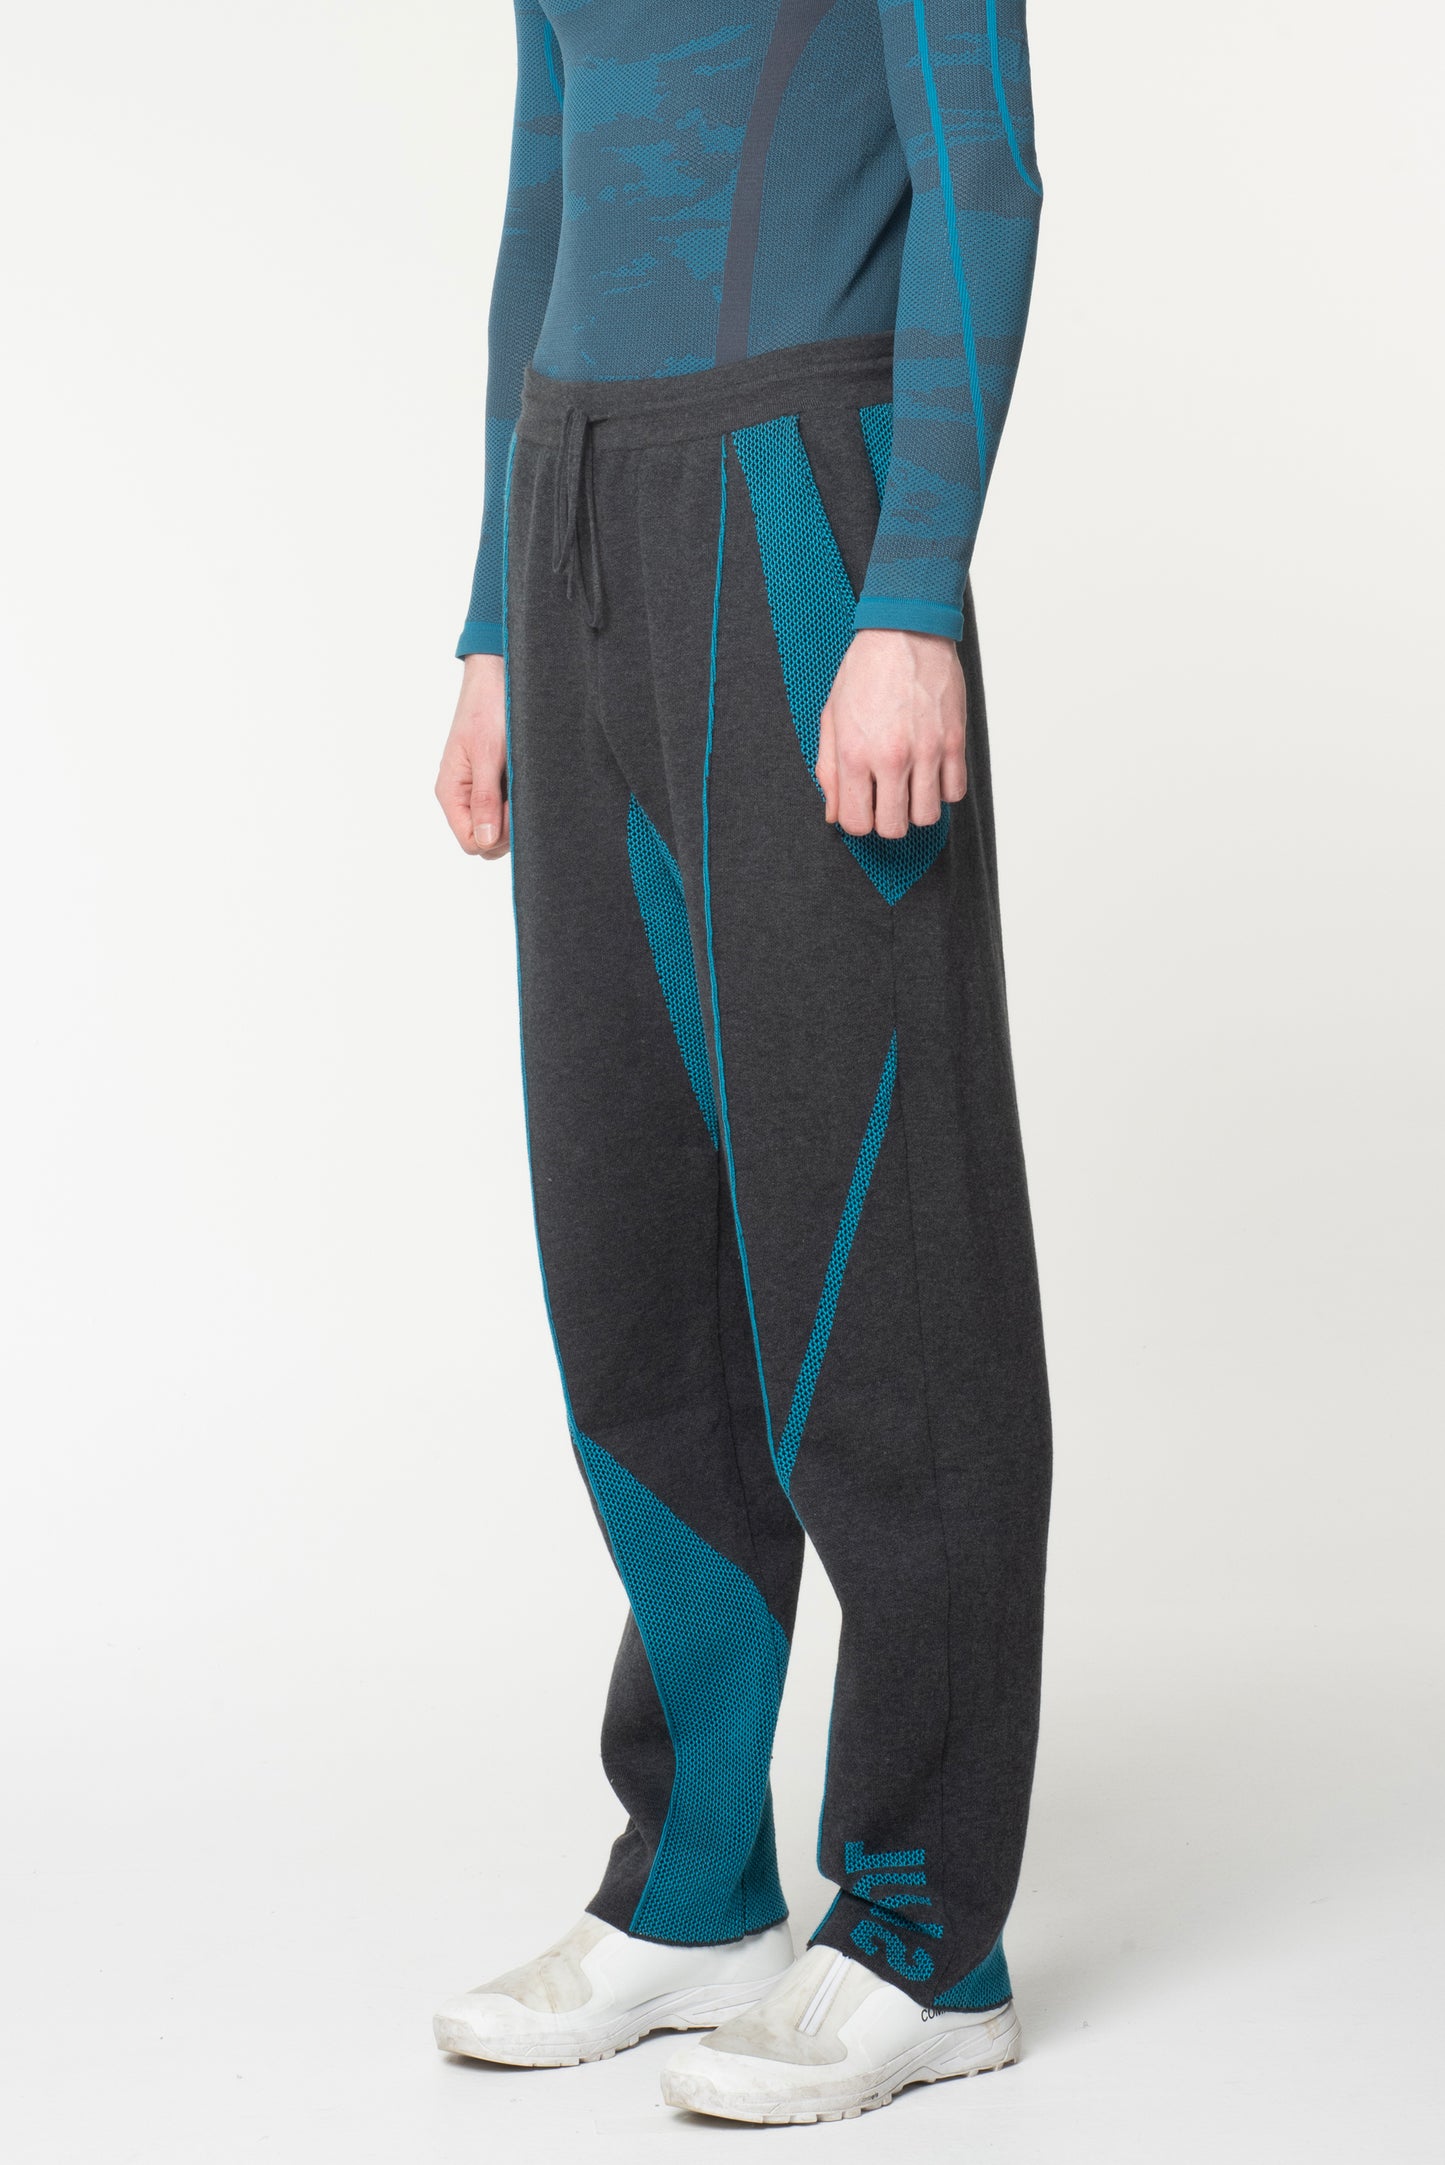 CYPHER MESH KNIT TROUSERS - ANTHRACITE